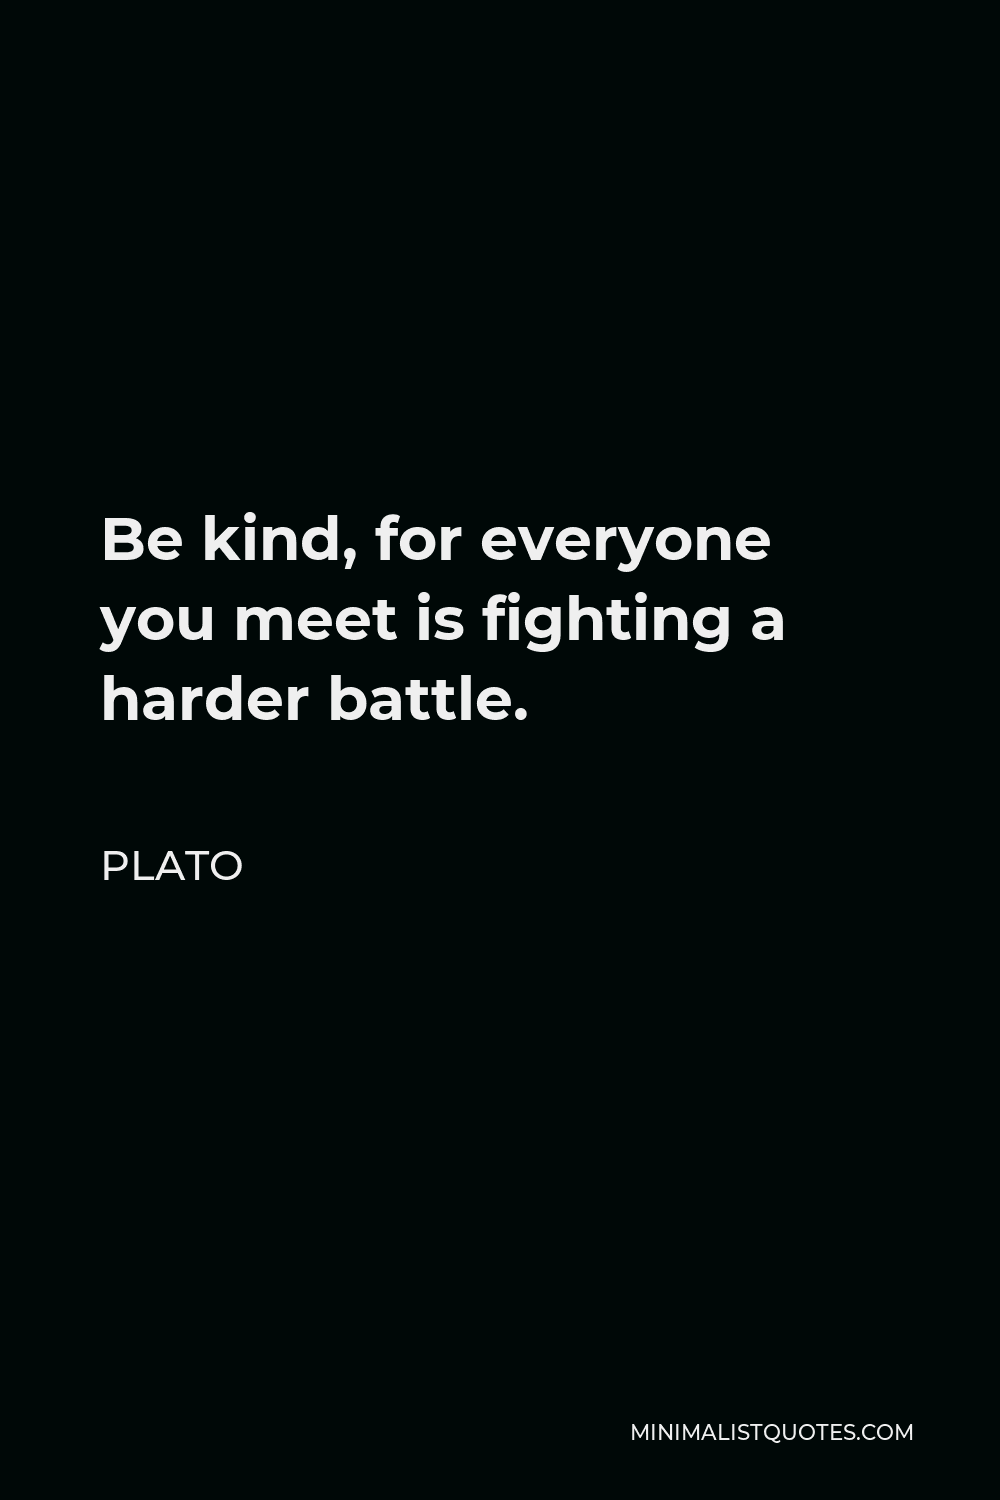 Plato Quote - Be kind, for everyone you meet is fighting a harder battle.